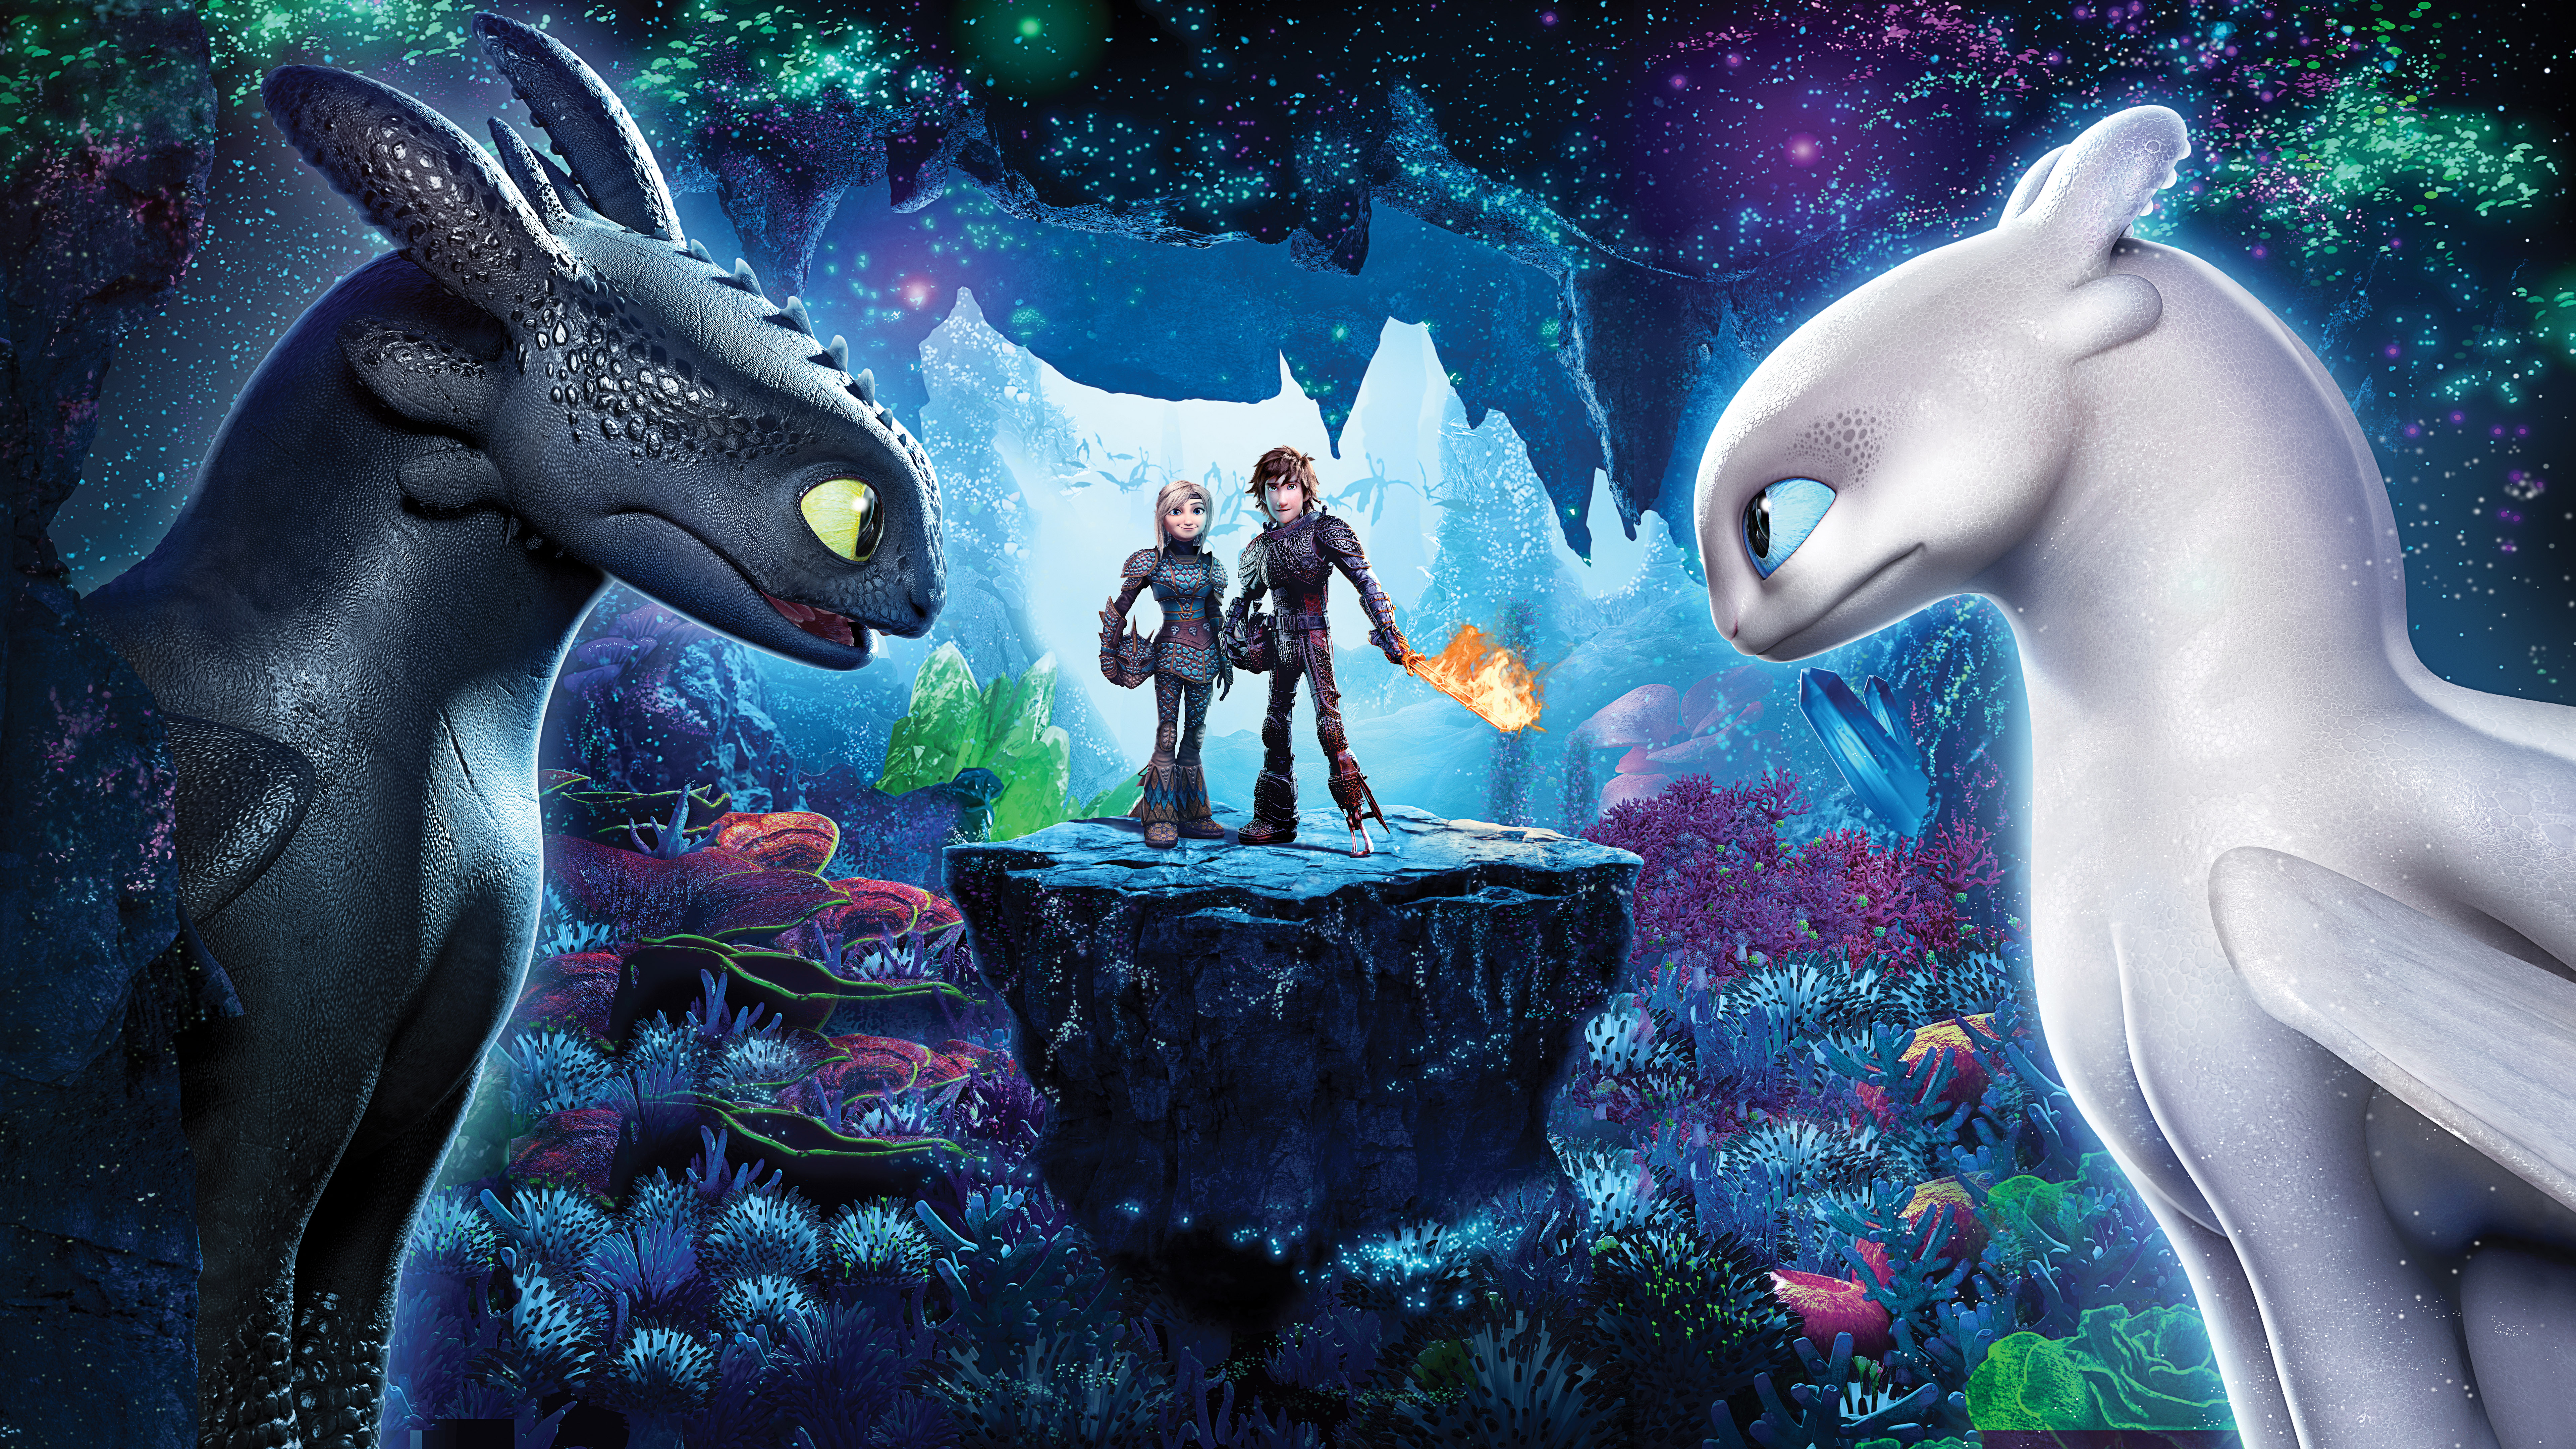 How to Train Your Dragon 3 The Hidden World 4K 8K Wallpapers